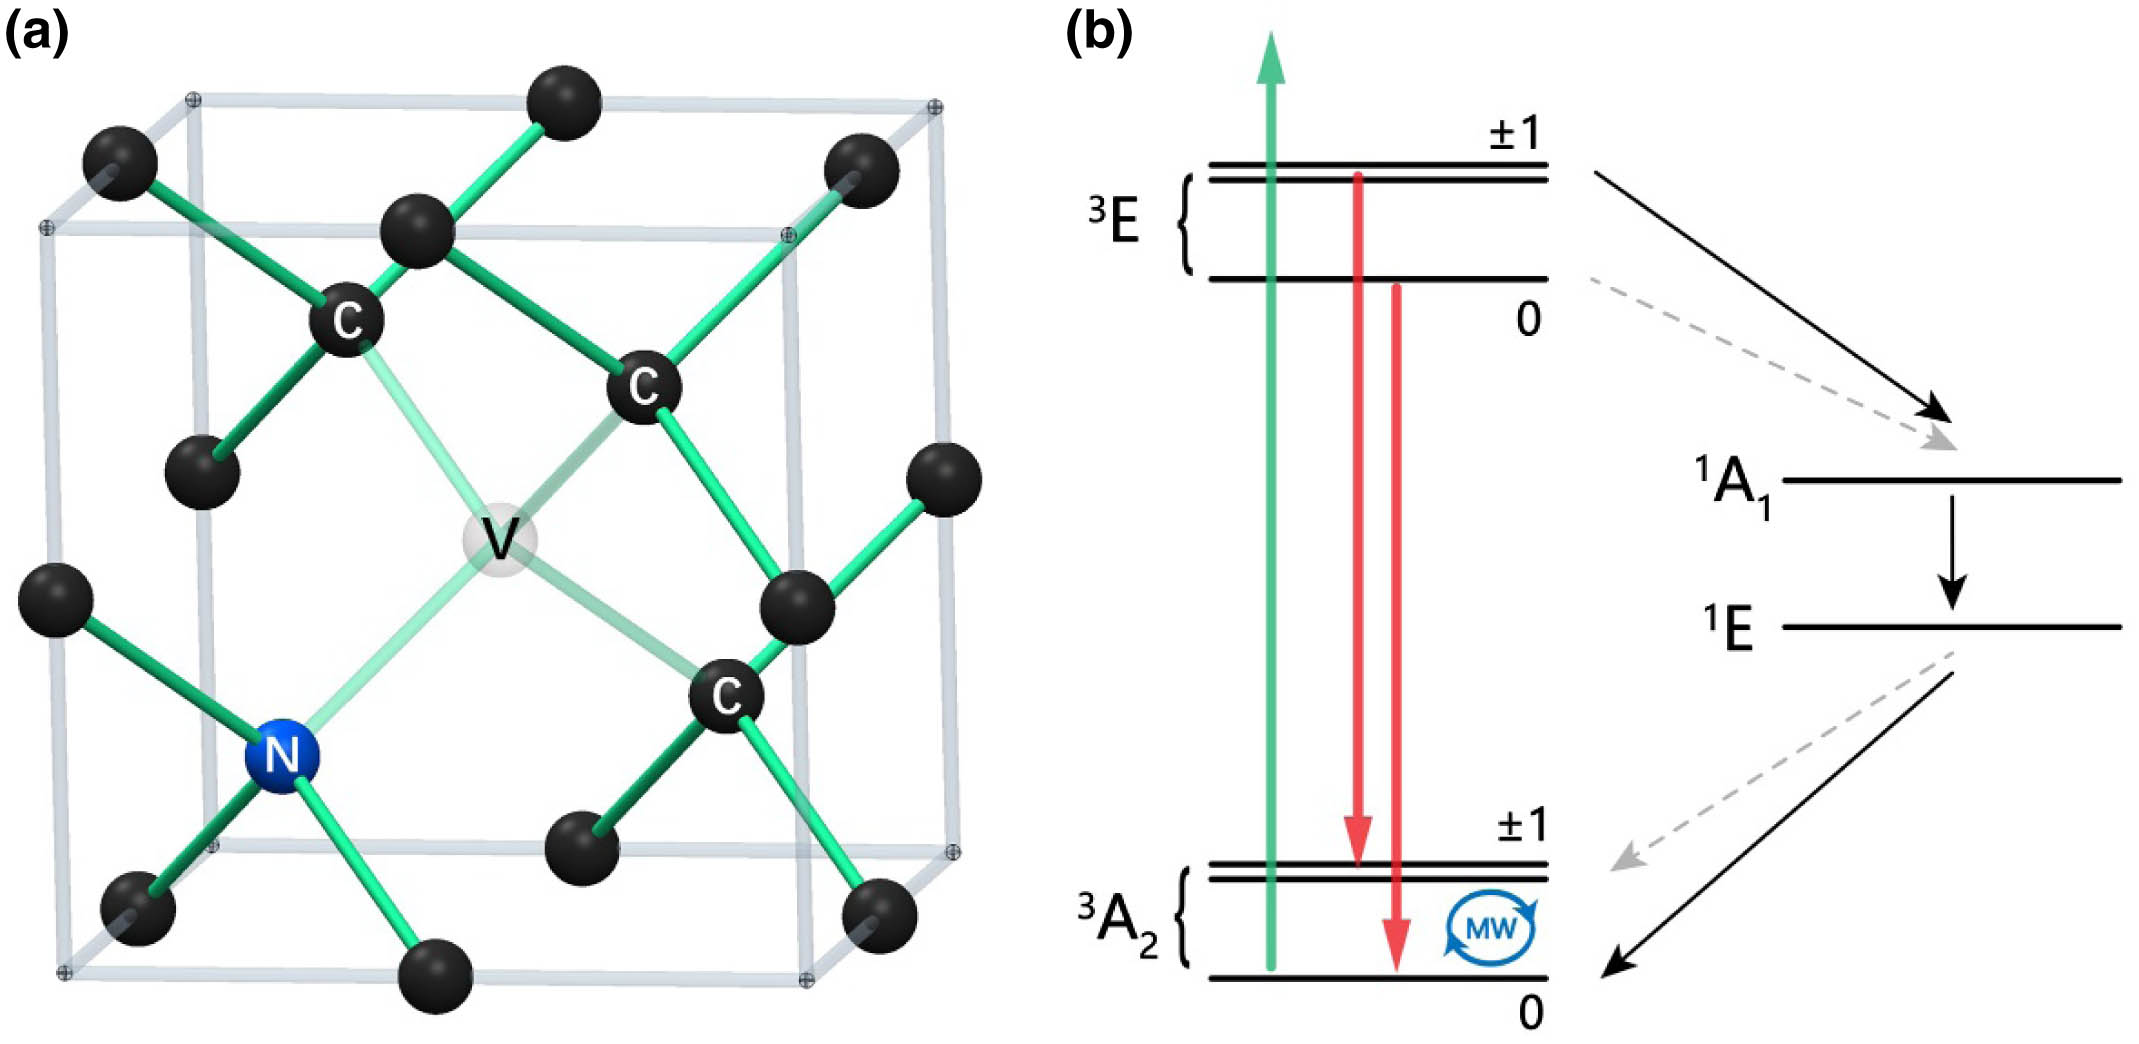 Properties of the nitrogen-vacancy center. (a) Illustration of the nitrogen-vacancy center and diamond lattice. Transparent, the vacancy; blue, the substitutional nitrogen atom; black, carbon atoms. (b) Relevant electronic energy levels of NV−. The NV− center is excited by 532 nm laser pulses off-resonantly (green arrow), and fluorescent photons from ∼600 to ∼800 nm are collected (red arrow). The strong (weak) intersystem crossings between spin-triplet states and spin-singlet states (E3→A11, E1→A23) are denoted by solid black (dashed gray) arrows. The spin states in the ground state (A23) can be manipulated by microwave (MW) excitation.